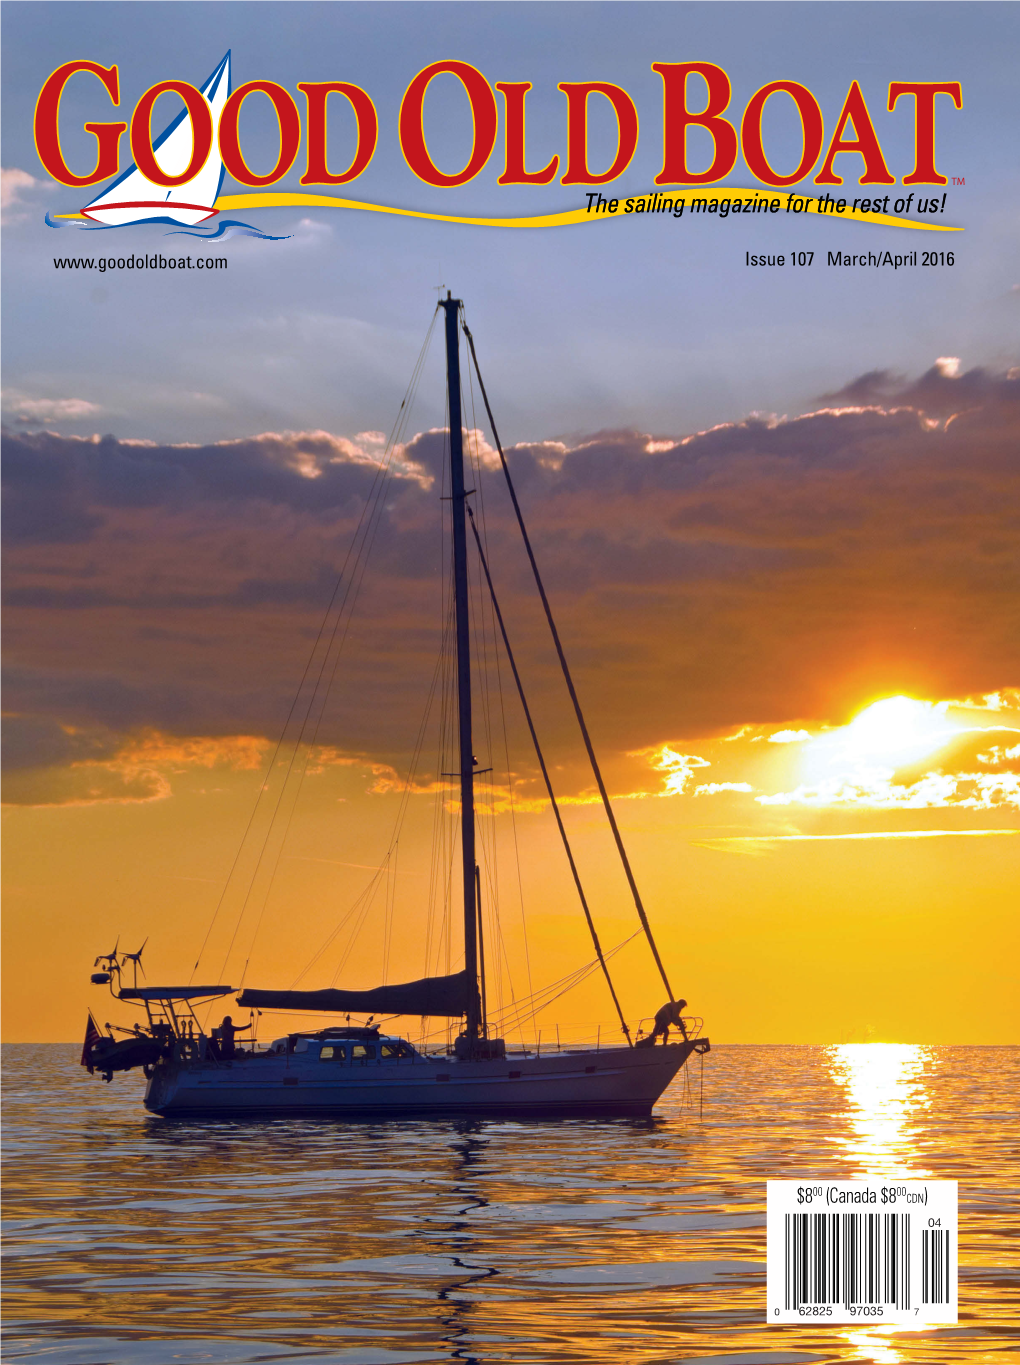 The Sailing Magazine for the Rest of Us! Issue 107 March/April 2016